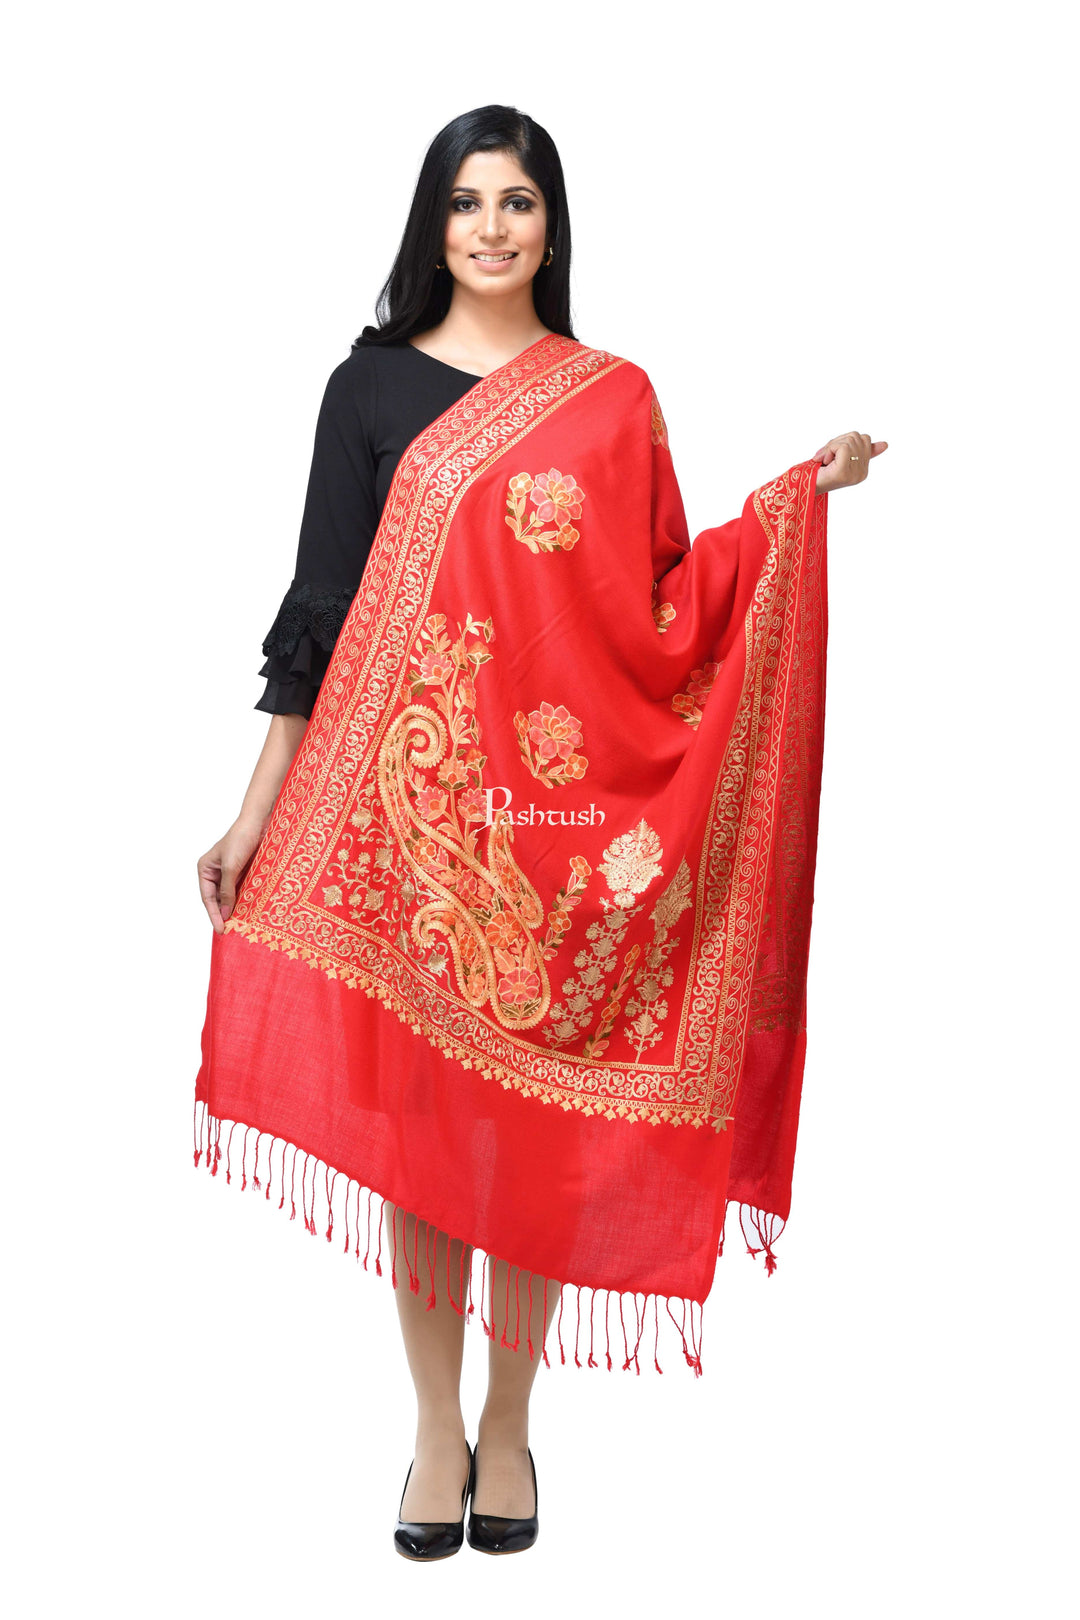 Pashwool Womens Stoles and Scarves Scarf Pashwool, Womens Kashmiri Aari Embroidery Stole, Soft Bamboo Deep Red